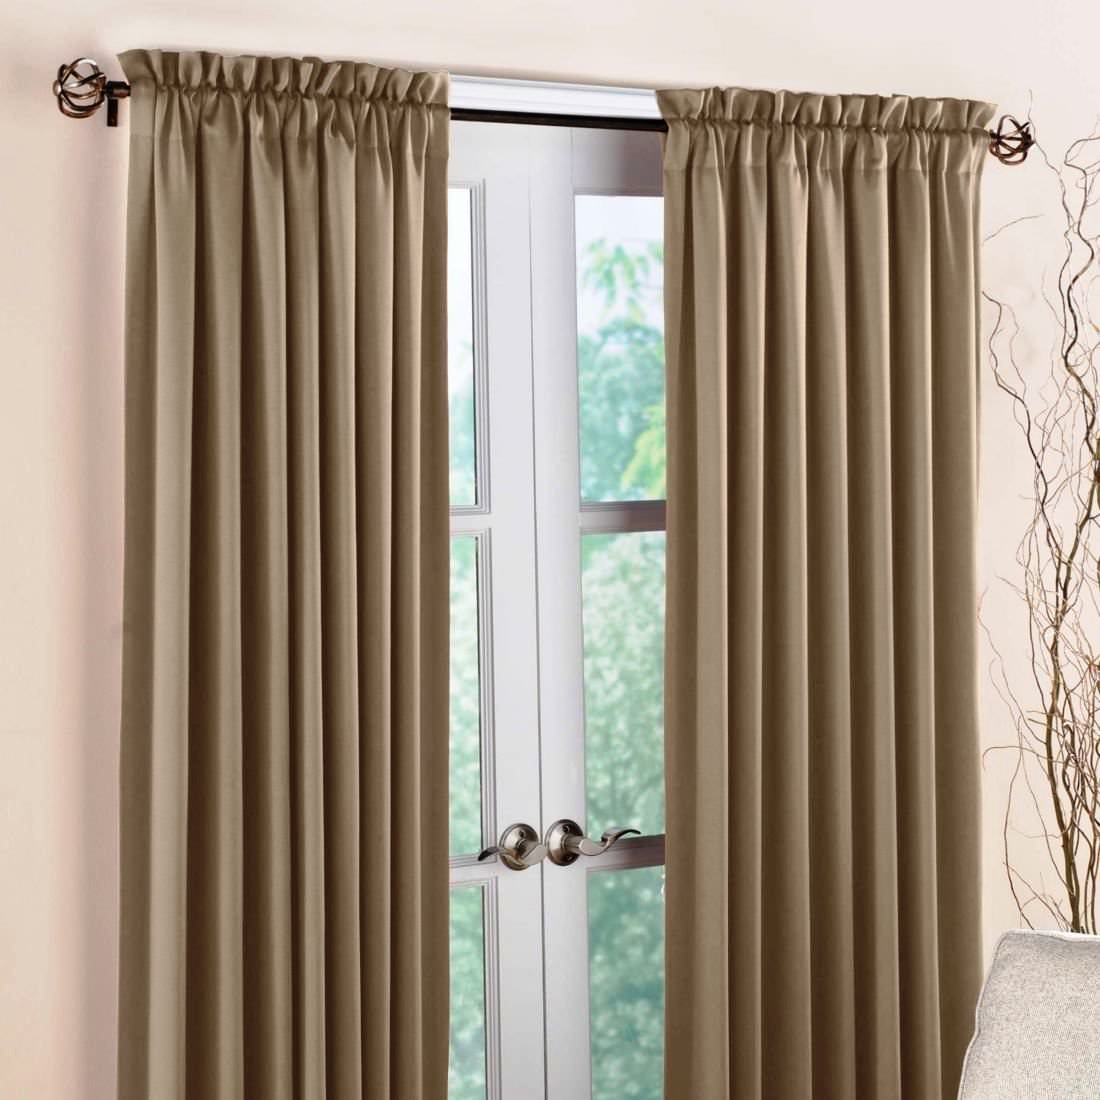 What Are Energy Efficient Curtains - A Very Cozy Home